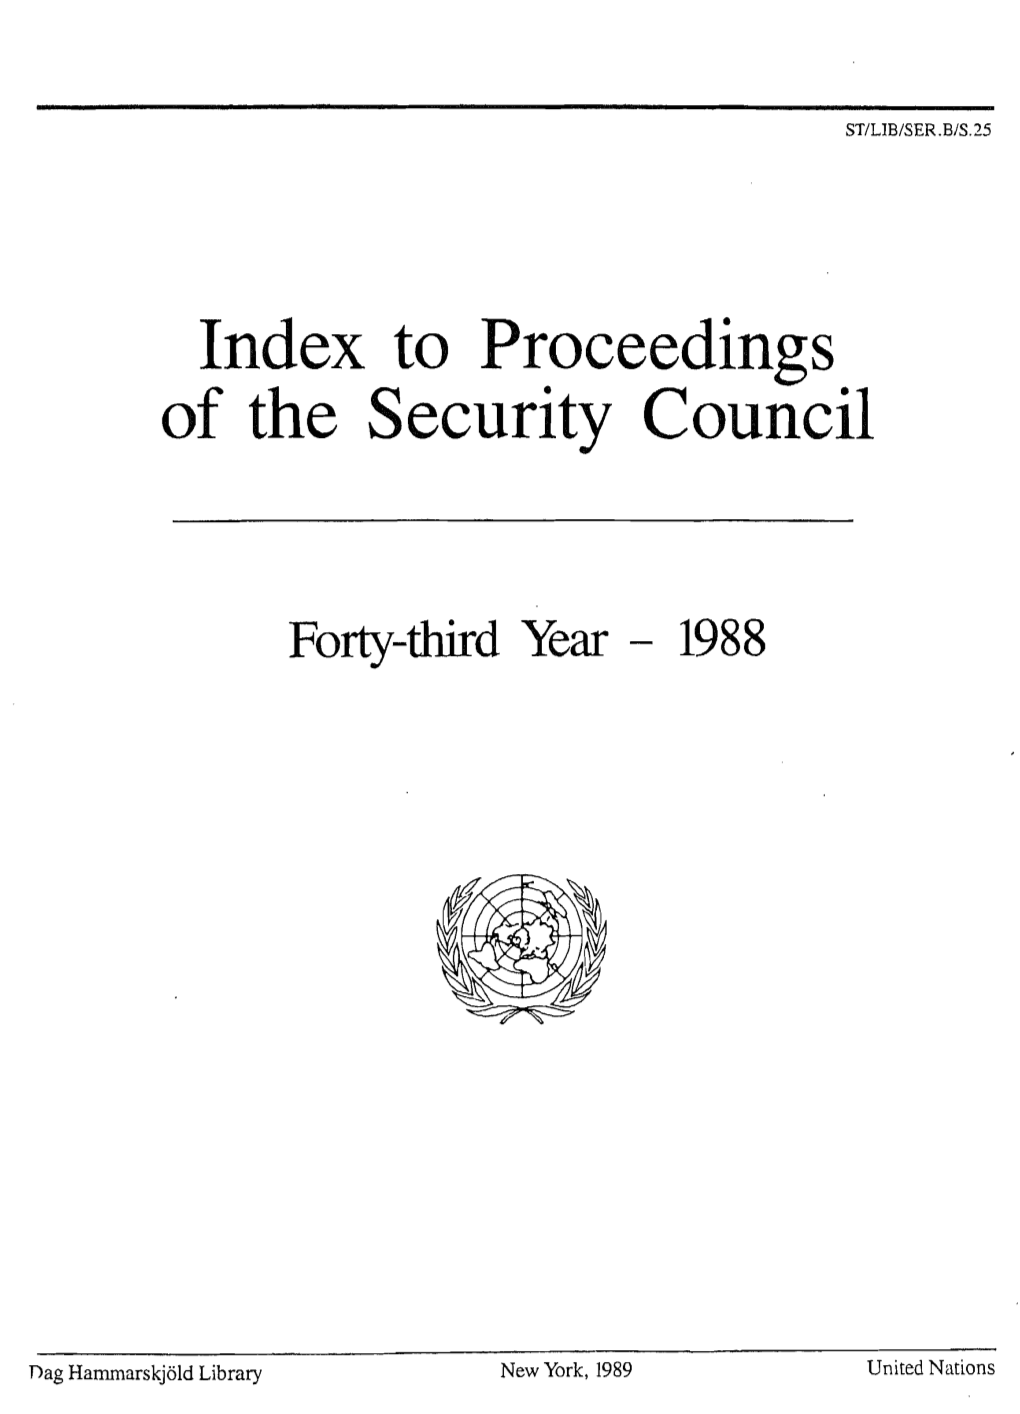 Index to Proceedings of the Security Council, Forty-Third Year -- 1988